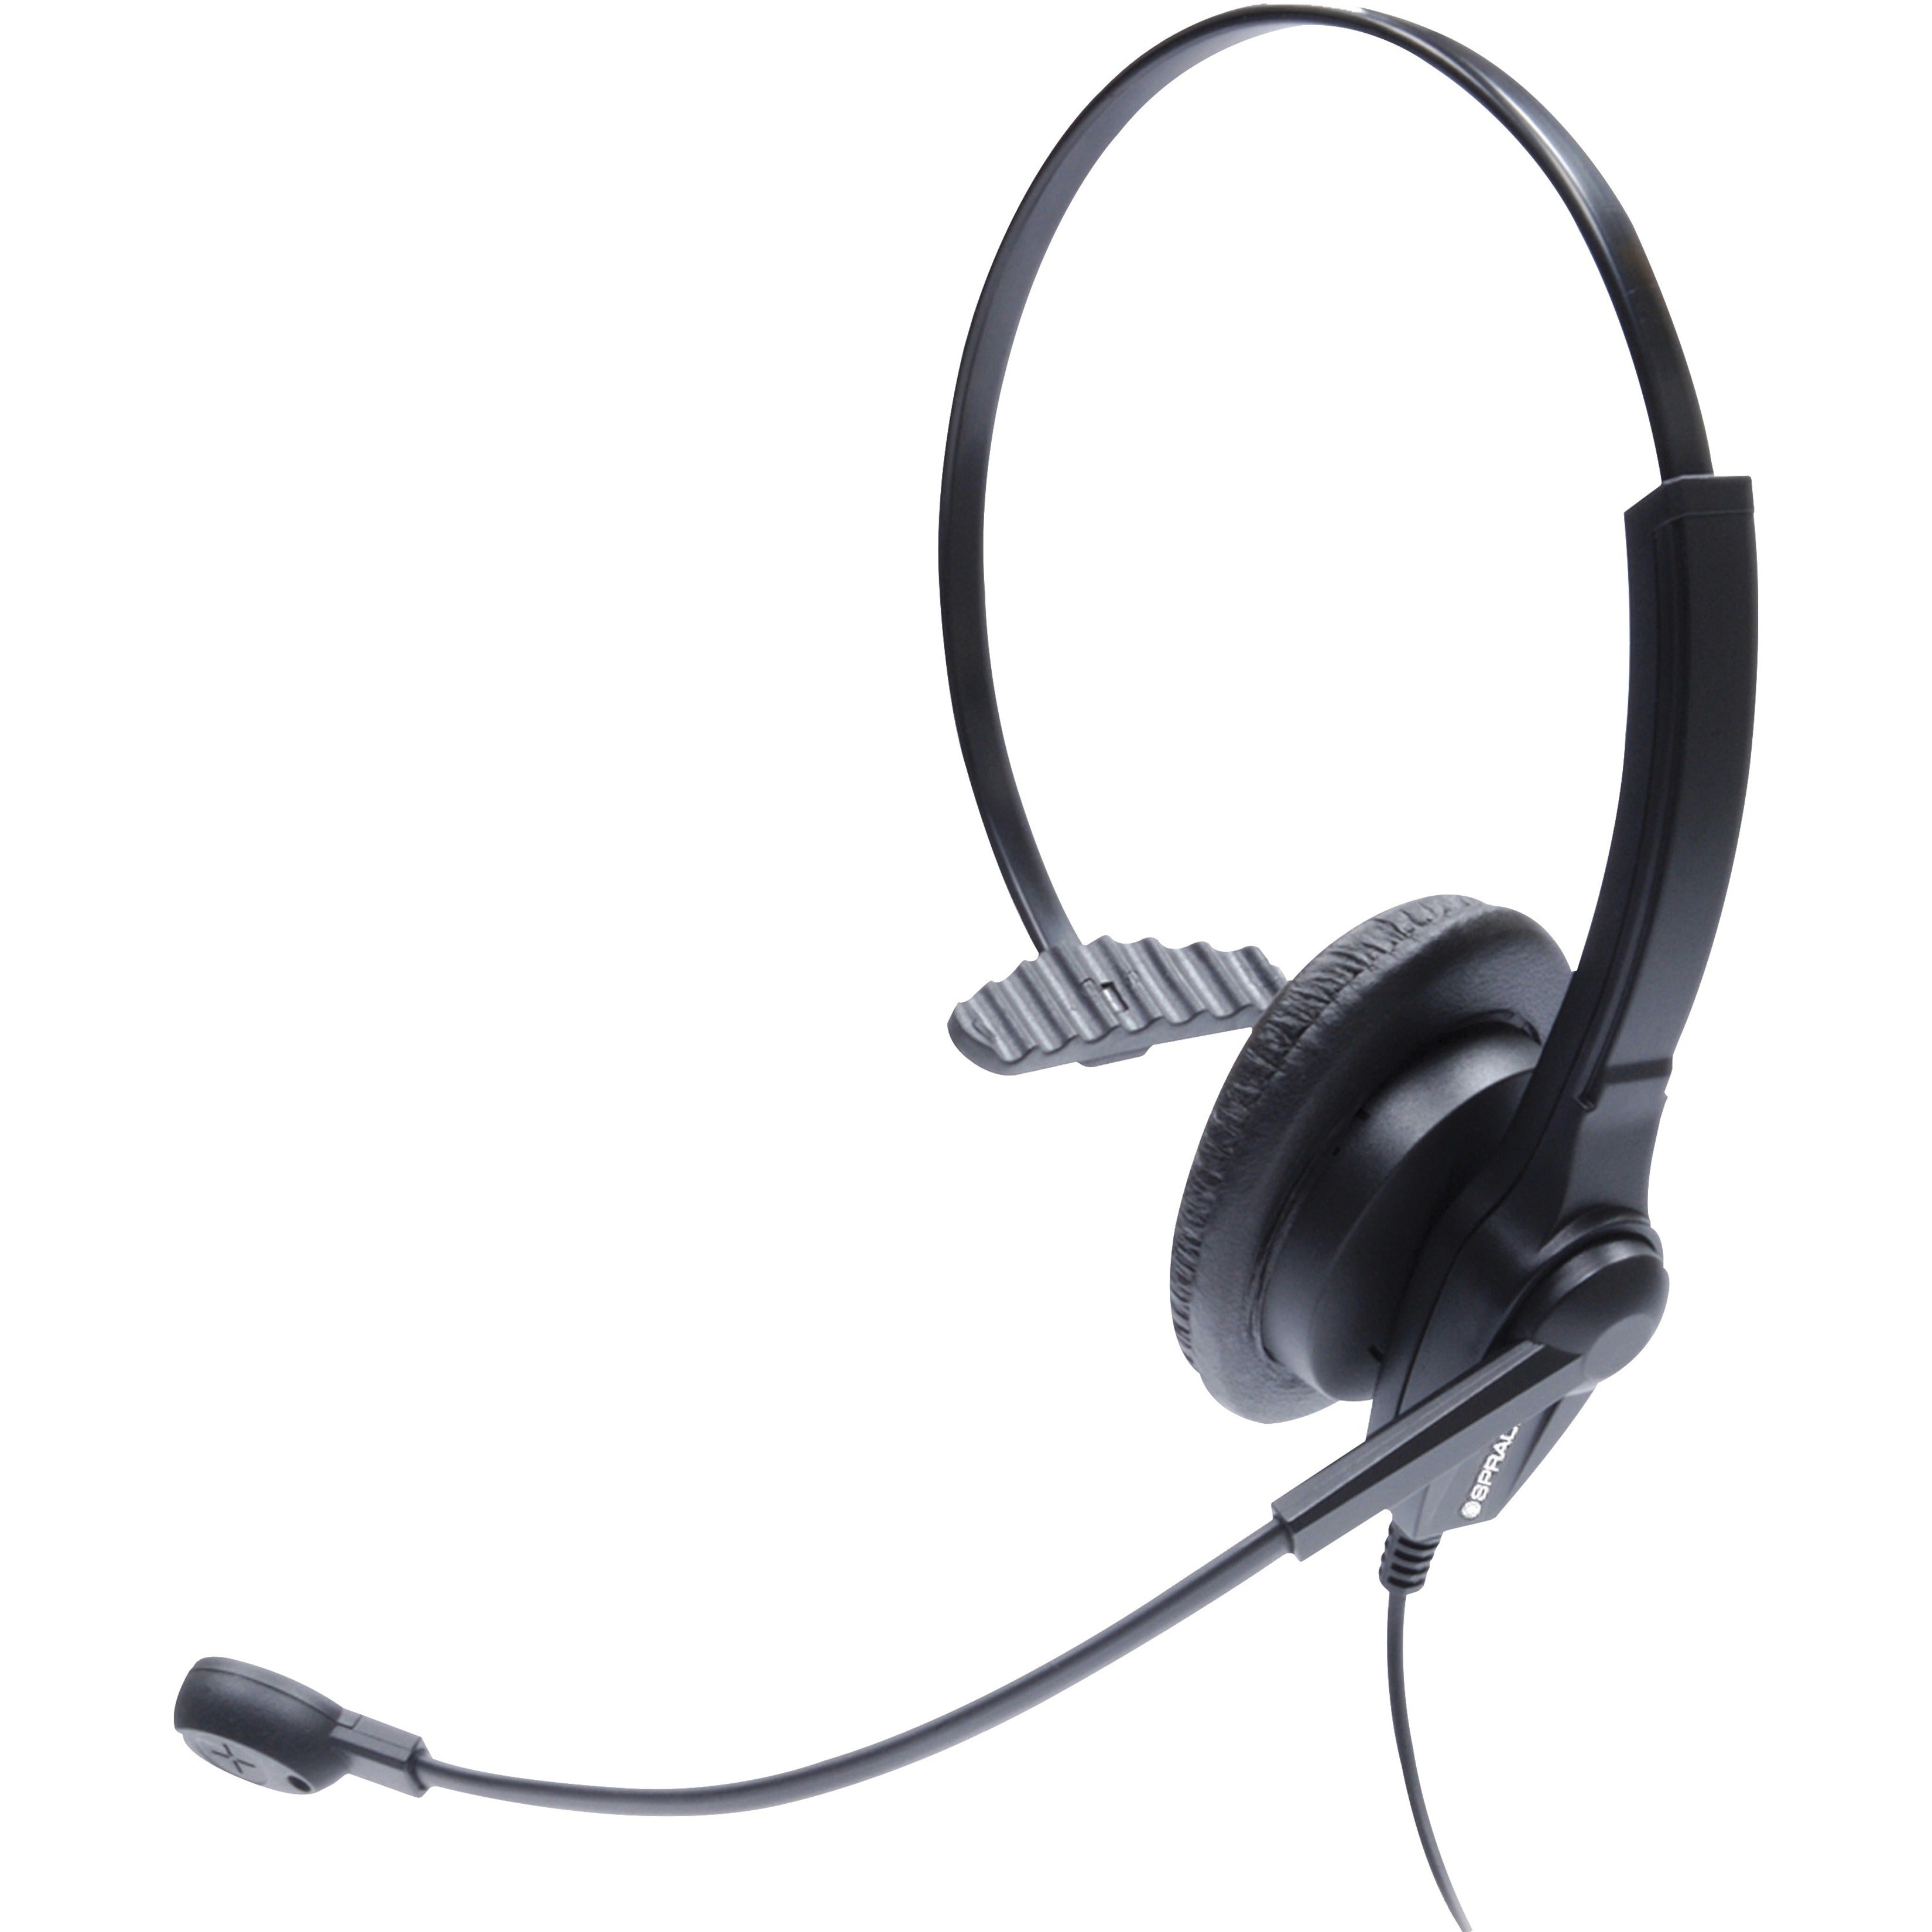 Spracht ZUMUC1 Z?M UC1 Headset, Monaural Over-the-head USB Wired Headset with Flexible Microphone, Comfortable and Durable, Noise Canceling, 1 Year Limited Warranty